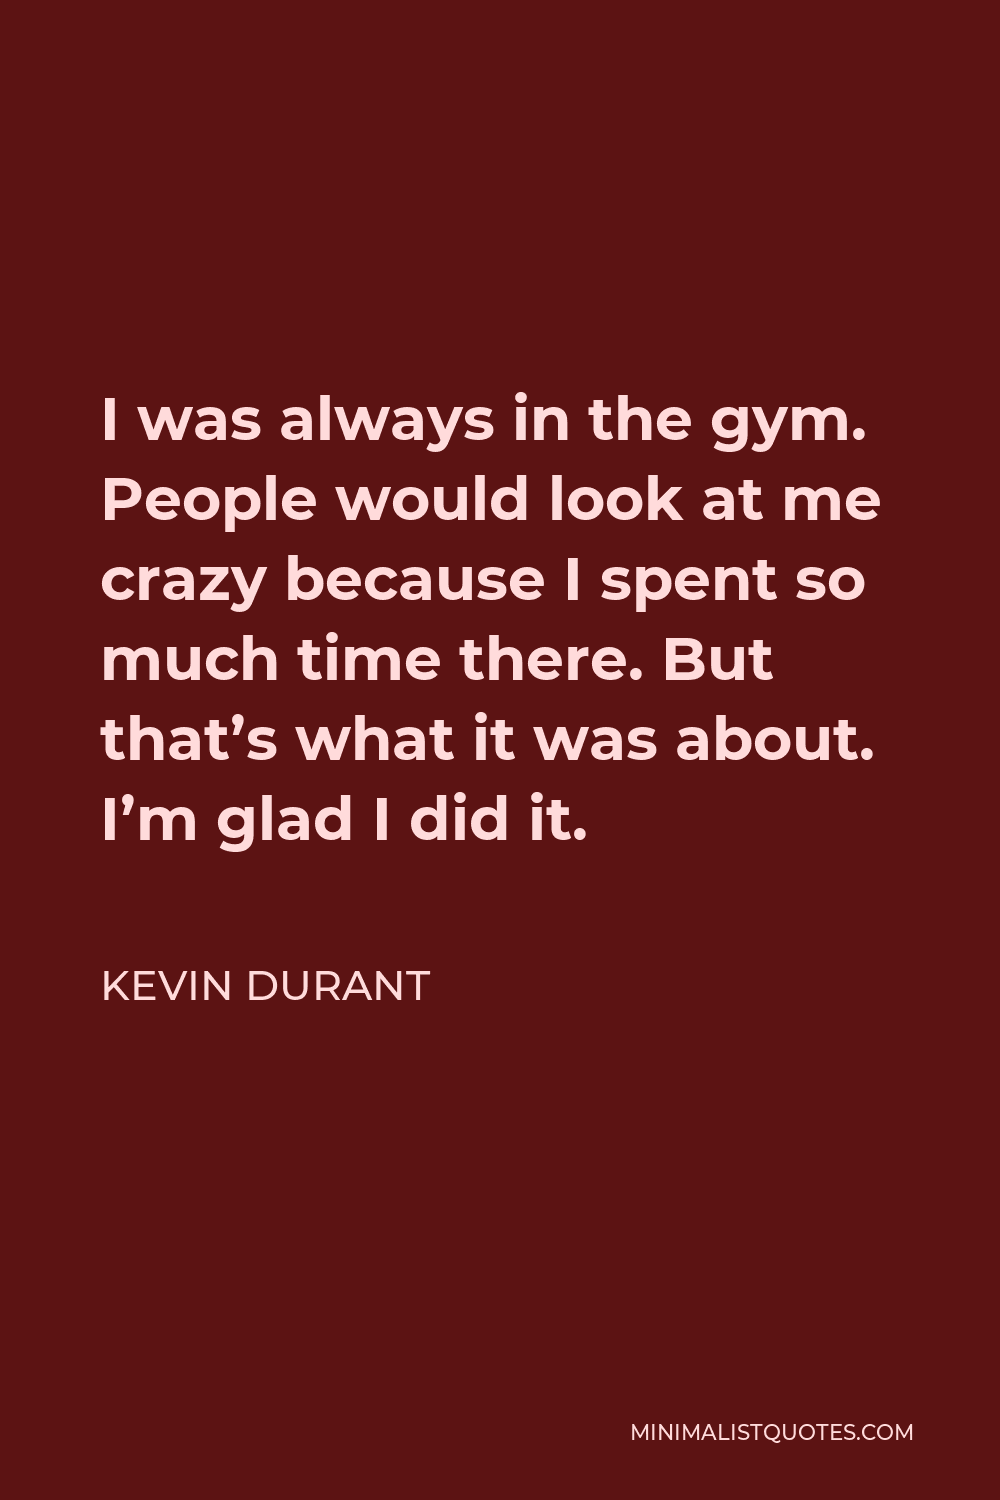 Kevin Durant Quote - I was always in the gym. People would look at me crazy because I spent so much time there. But that’s what it was about. I’m glad I did it.